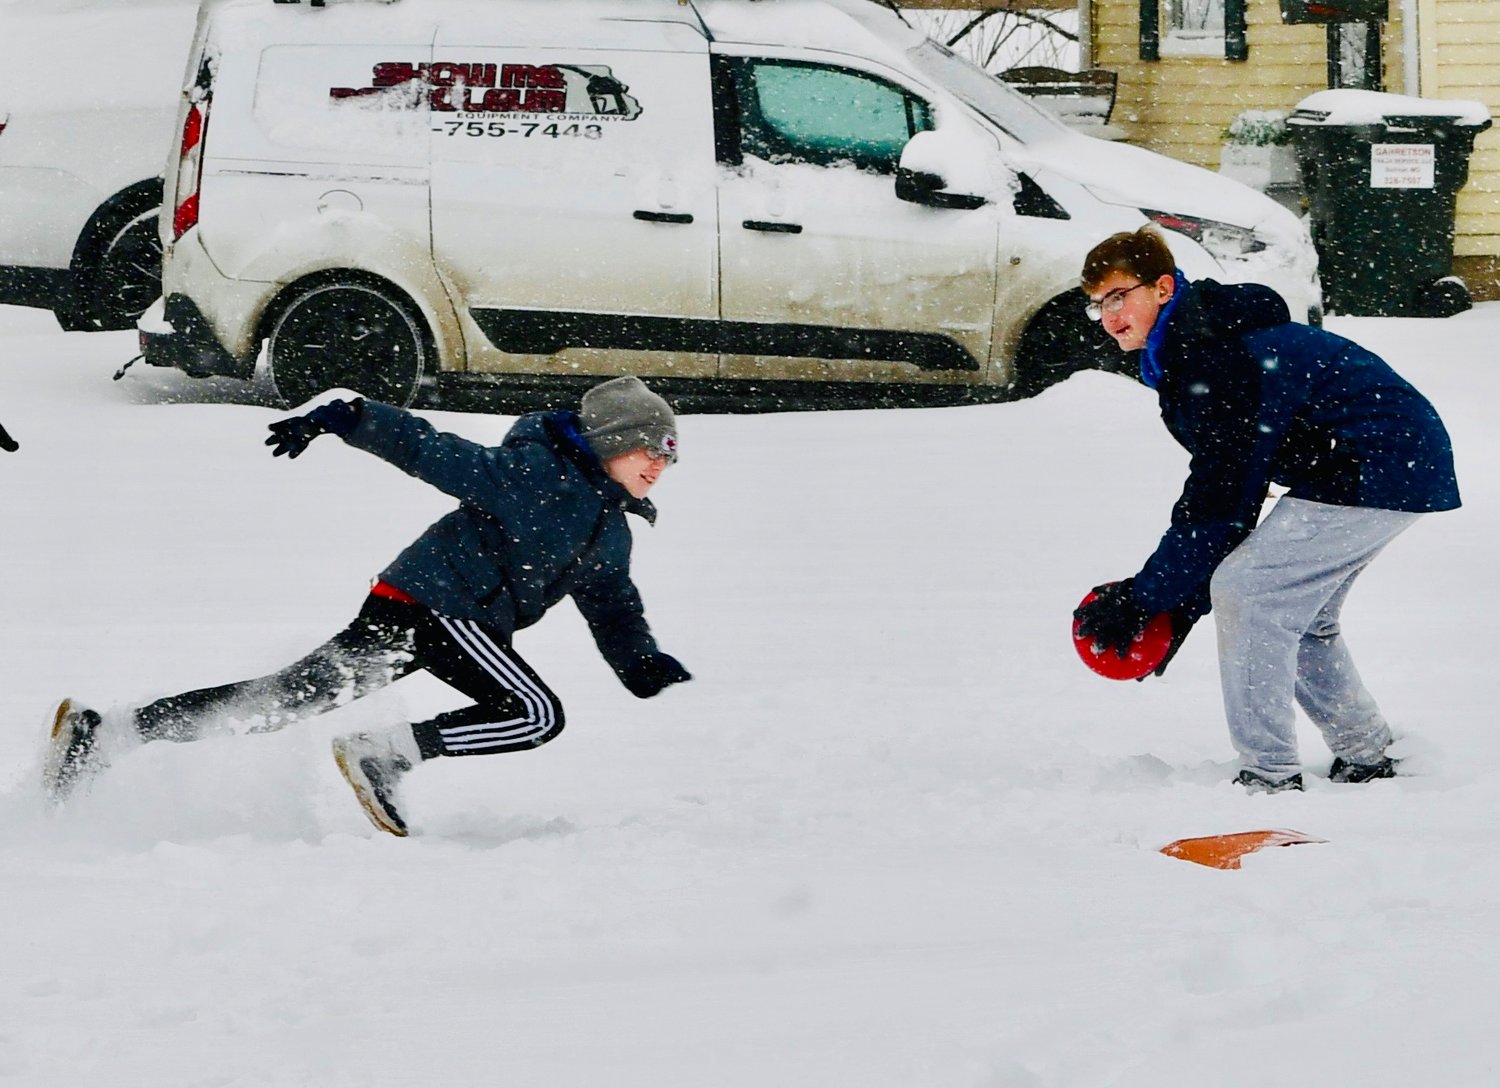 Hudson Ryan, left, and Carter Ryan “have a ball” playing in the snow Thursday, Feb. 3, at Bolivar’s Open Hearts Methodist Church after a winter storm blanketed the area in white, turning familiar scenes into a winter wonderland. Share your photos of the snow on the BH-FP’s Facebook page and watch for more pictures in the Wednesday, Feb. 9, issue.